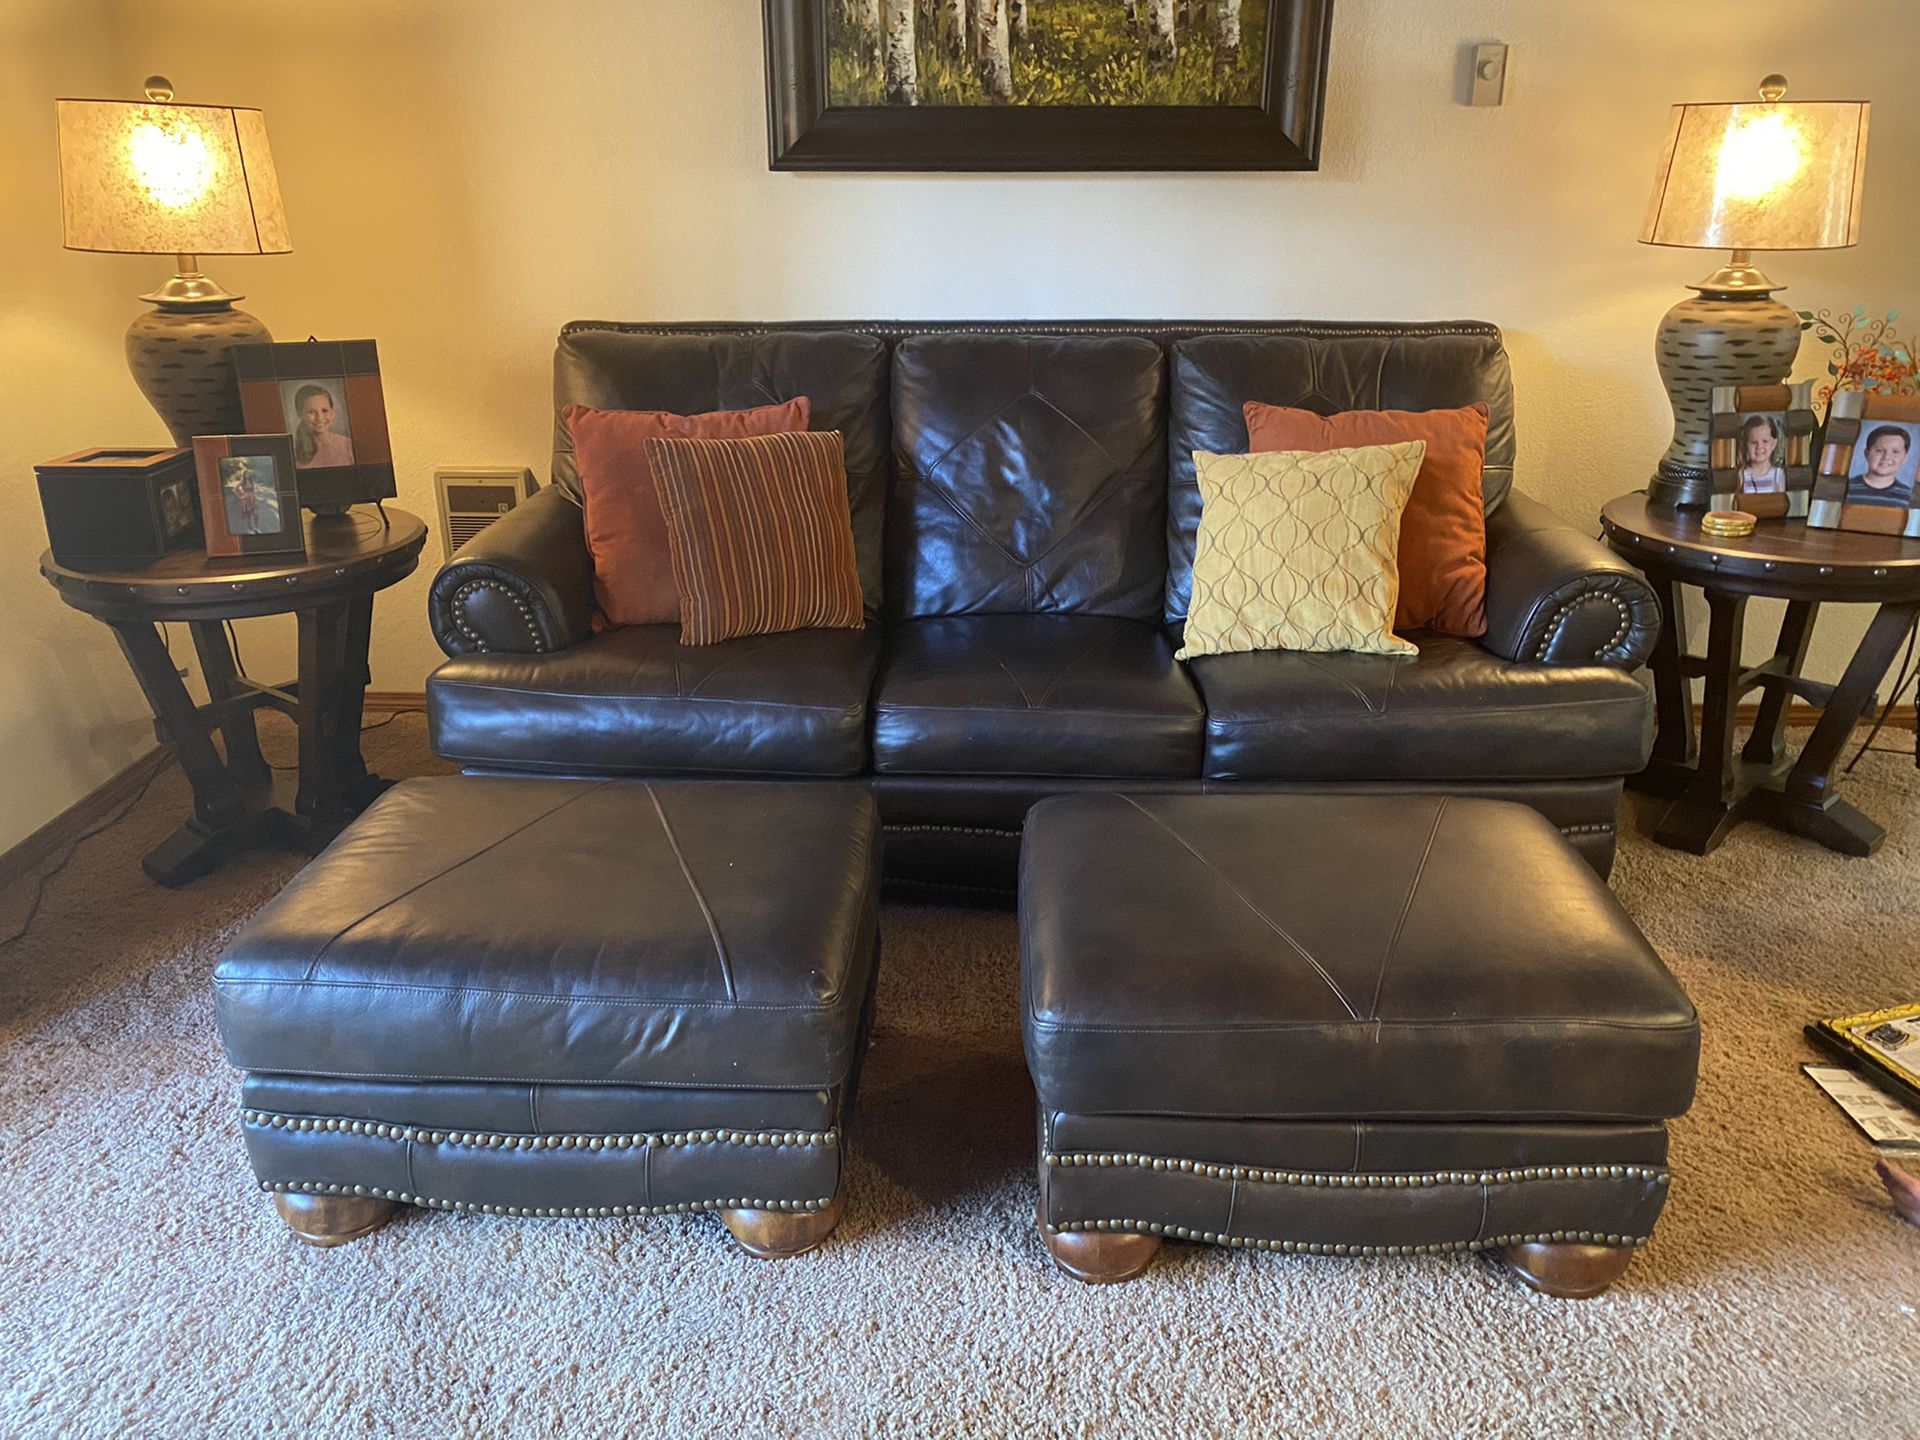 Leather couch with hide-abed and two ottomans and pillows